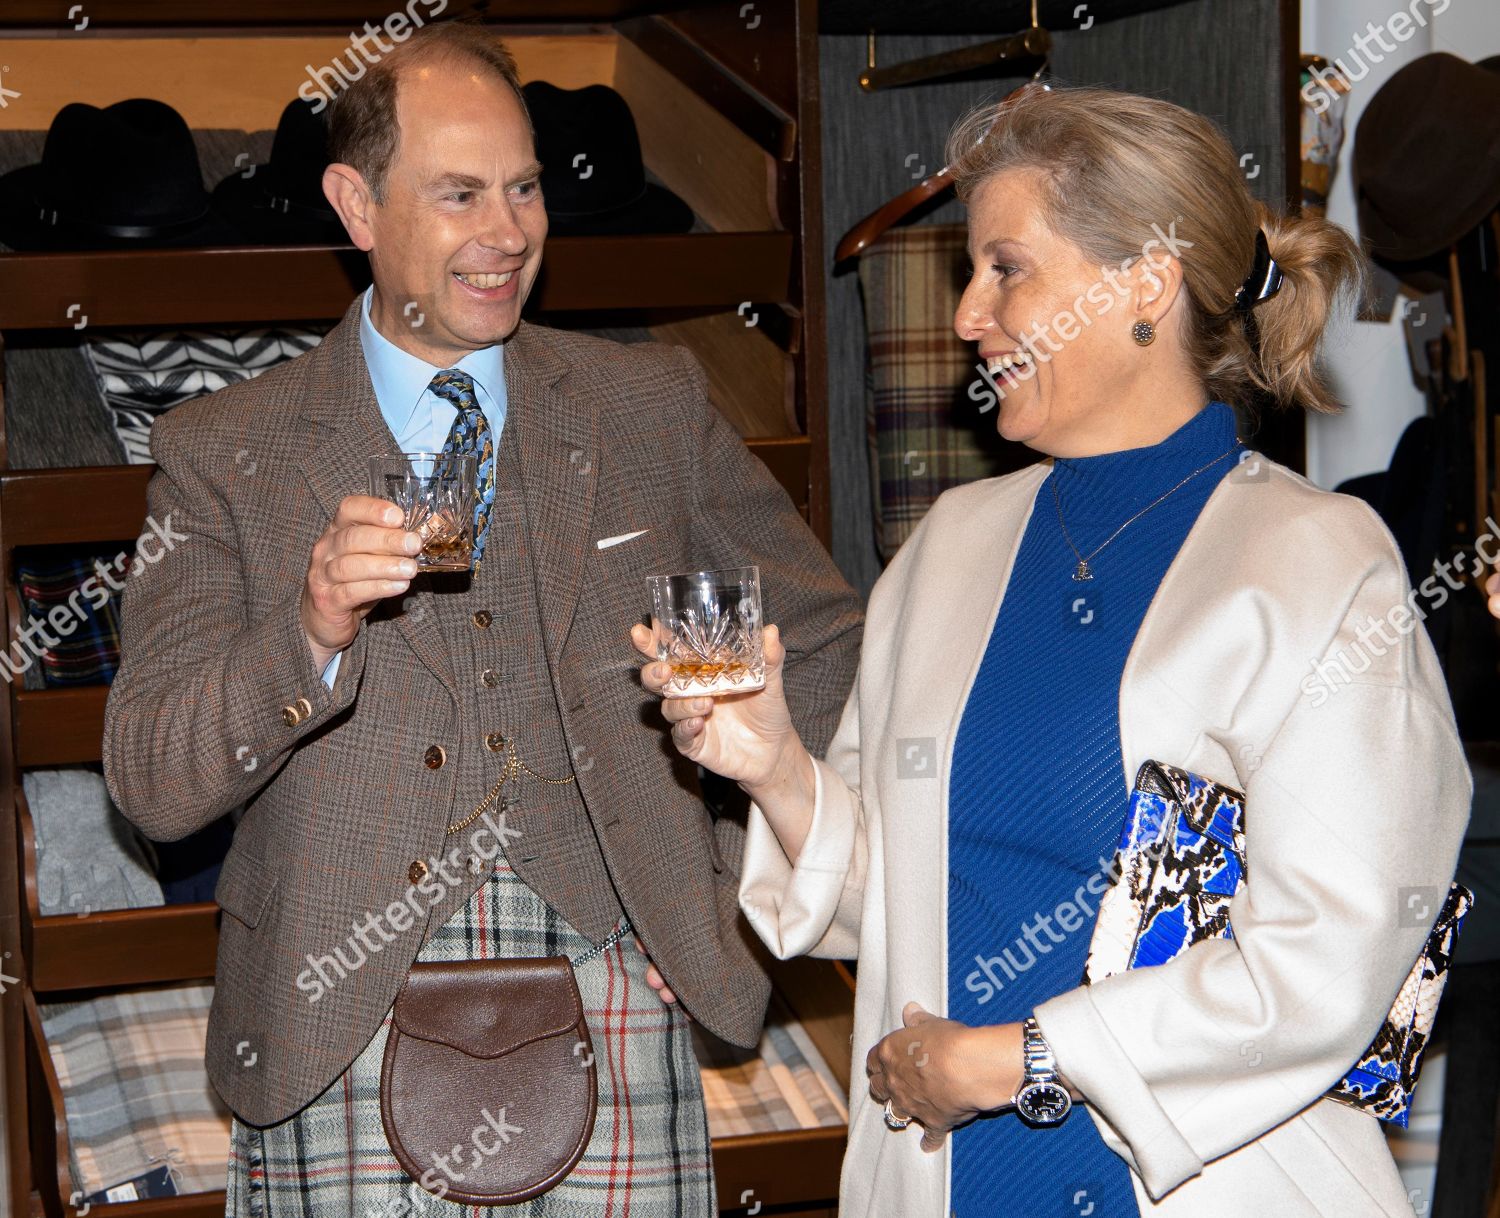 sophie-countess-of-wessex-and-prince-edward-visit-to-scotland-uk-shutterstock-editorial-10326116bw.jpg